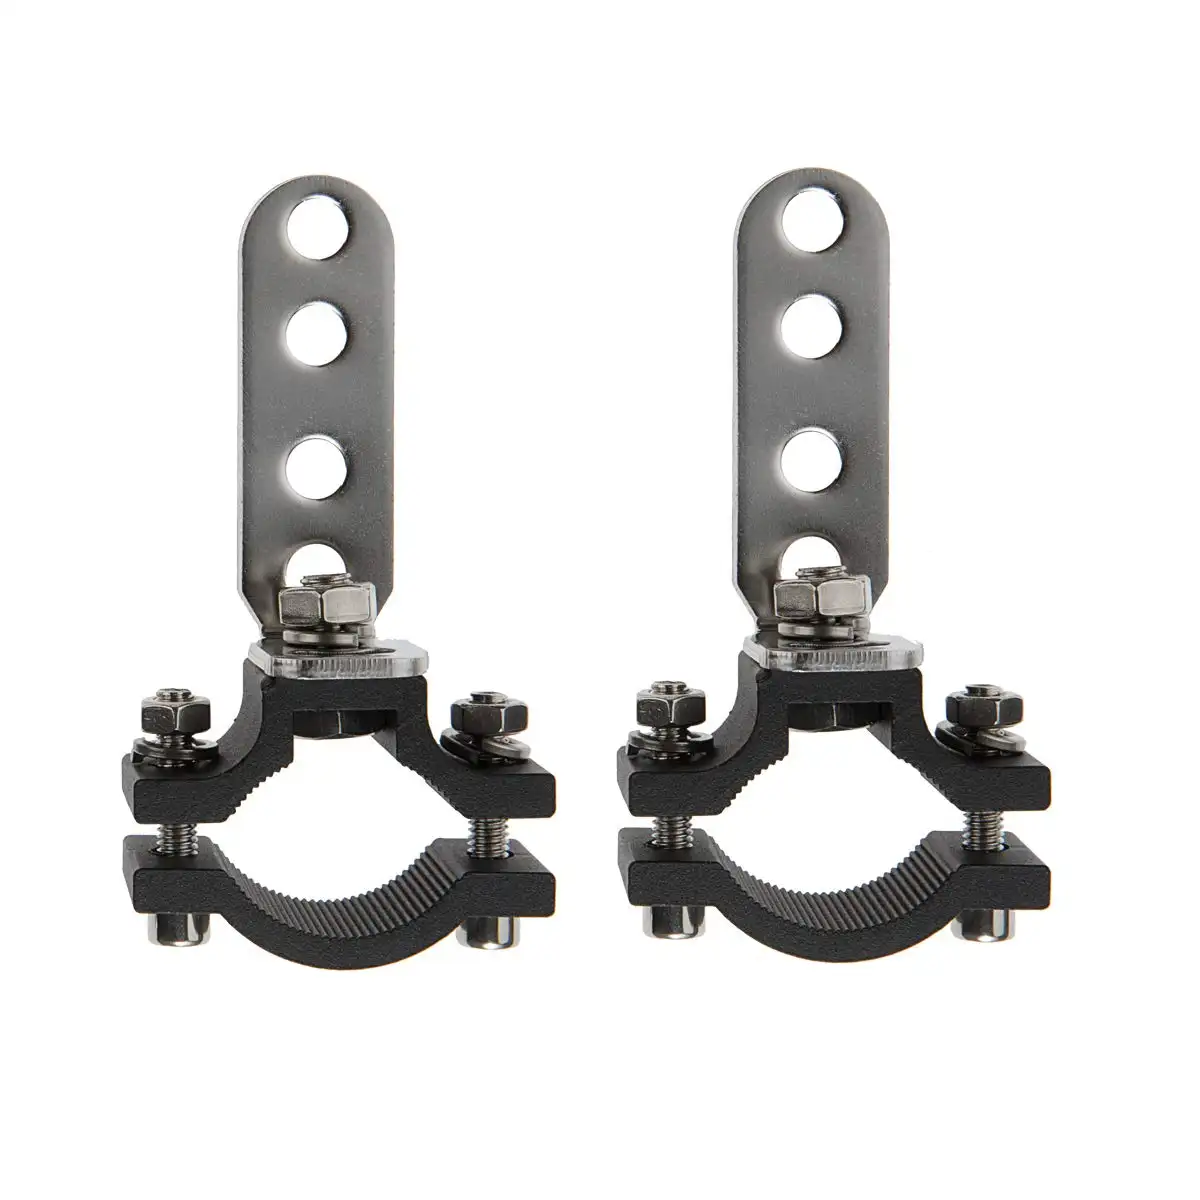 Motorcycle Bicycle Mount Bracket 1.2 Inch Car Bull Bar Holder Clamp Offroad Tube Clamps Mounting Brackets for LED Offroad Light